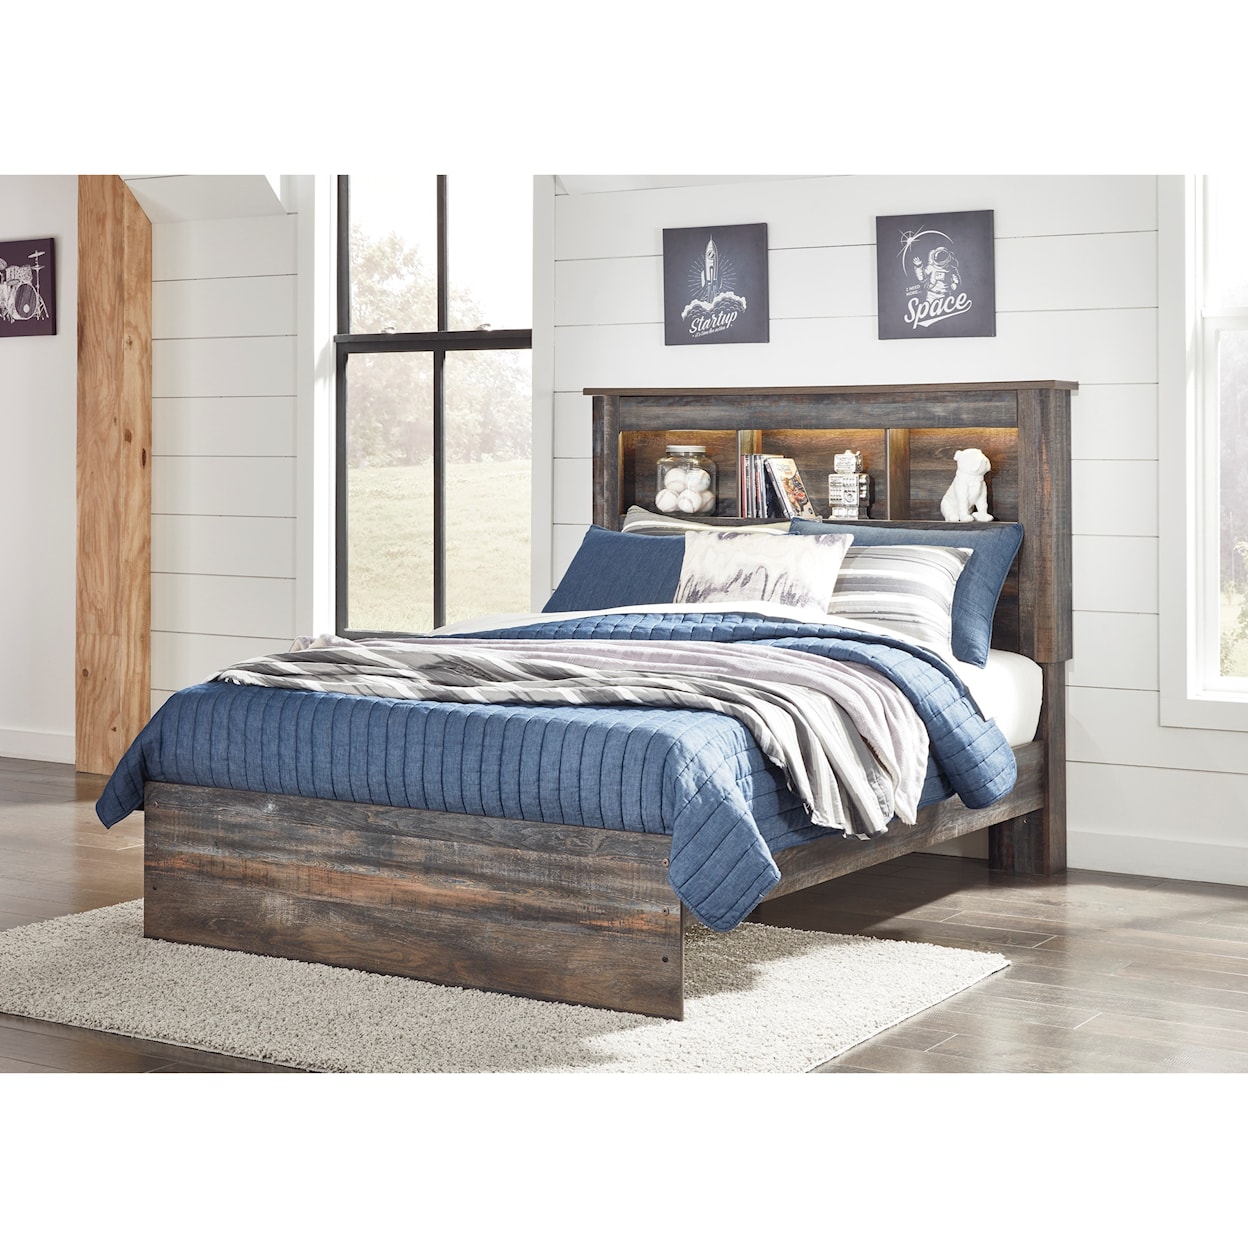 Signature Design by Ashley Baleigh Queen Bookcase Bed